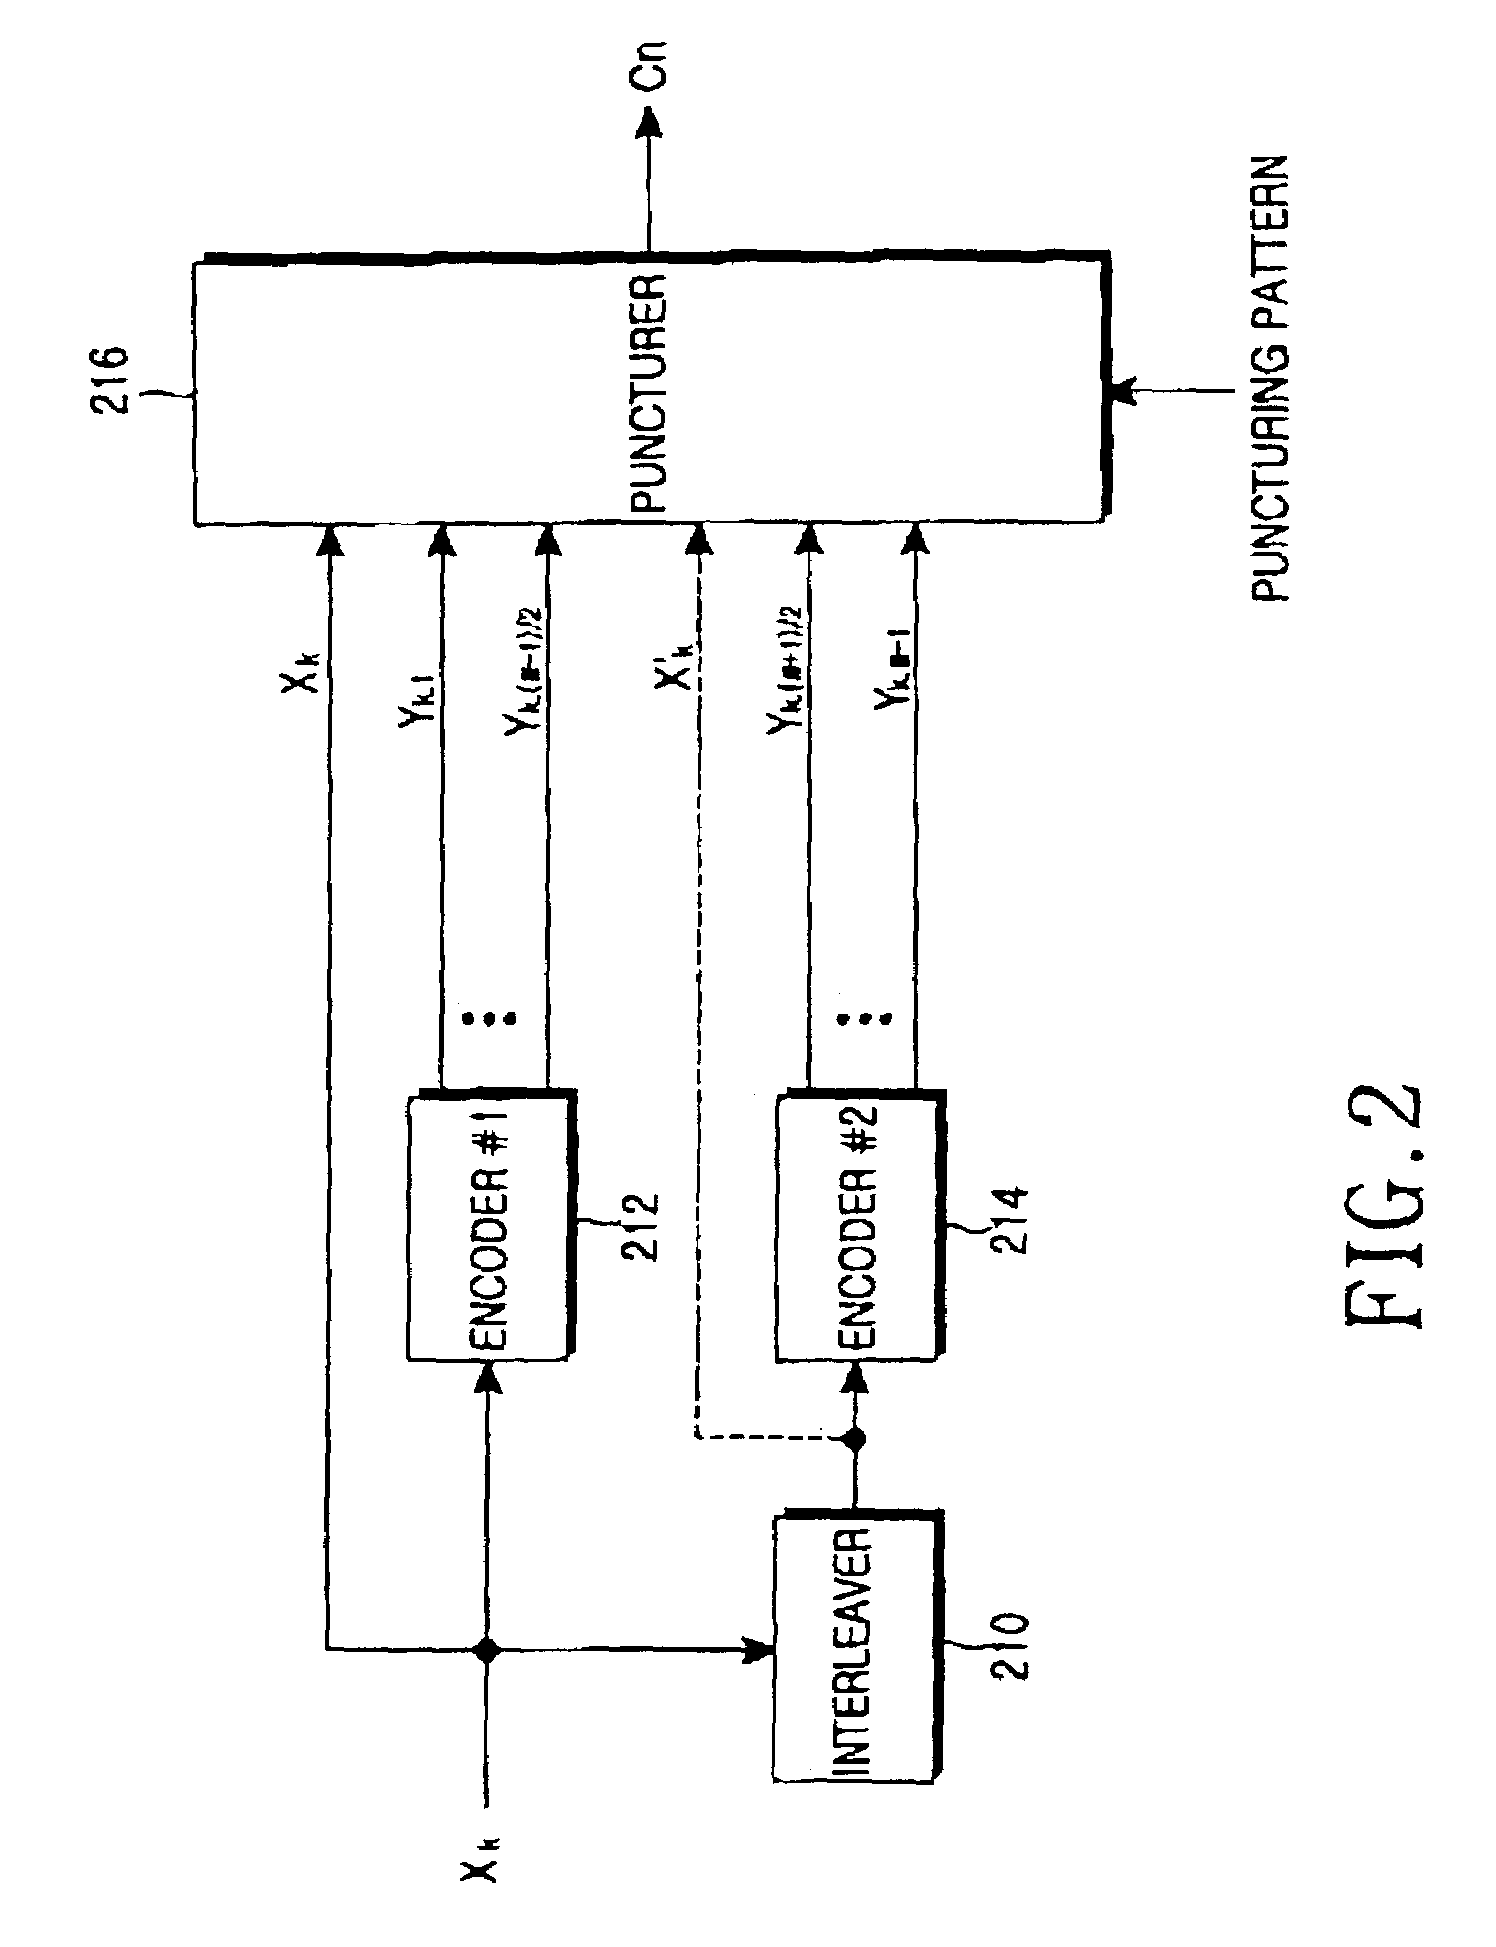 Apparatus and method for performing coding and rate matching in a CDMA mobile communication system